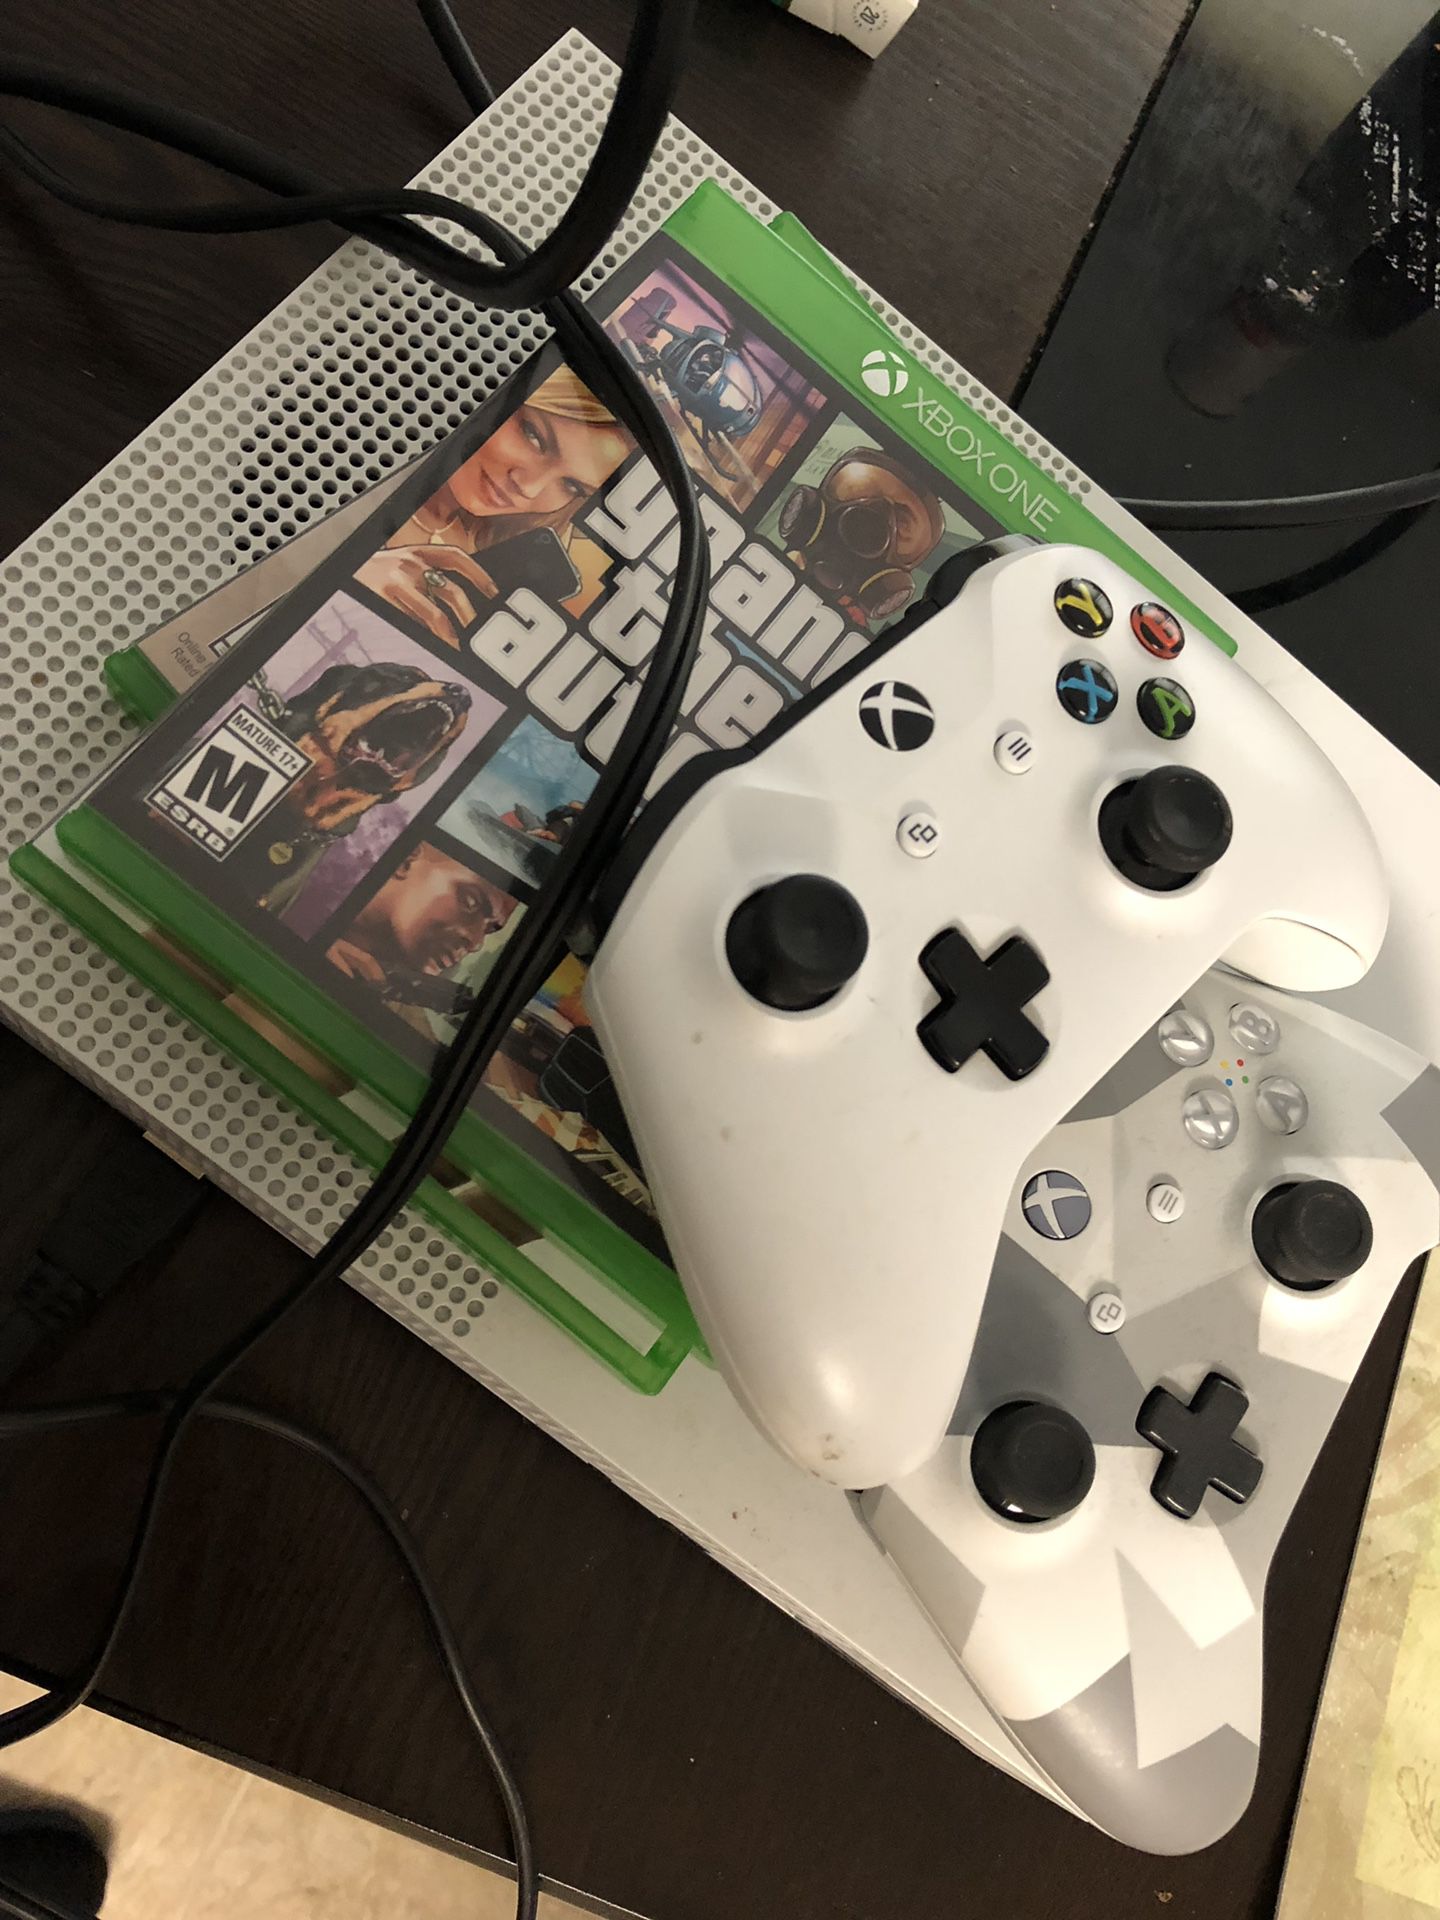 Xbox one package with 2 wireless controllers and games.